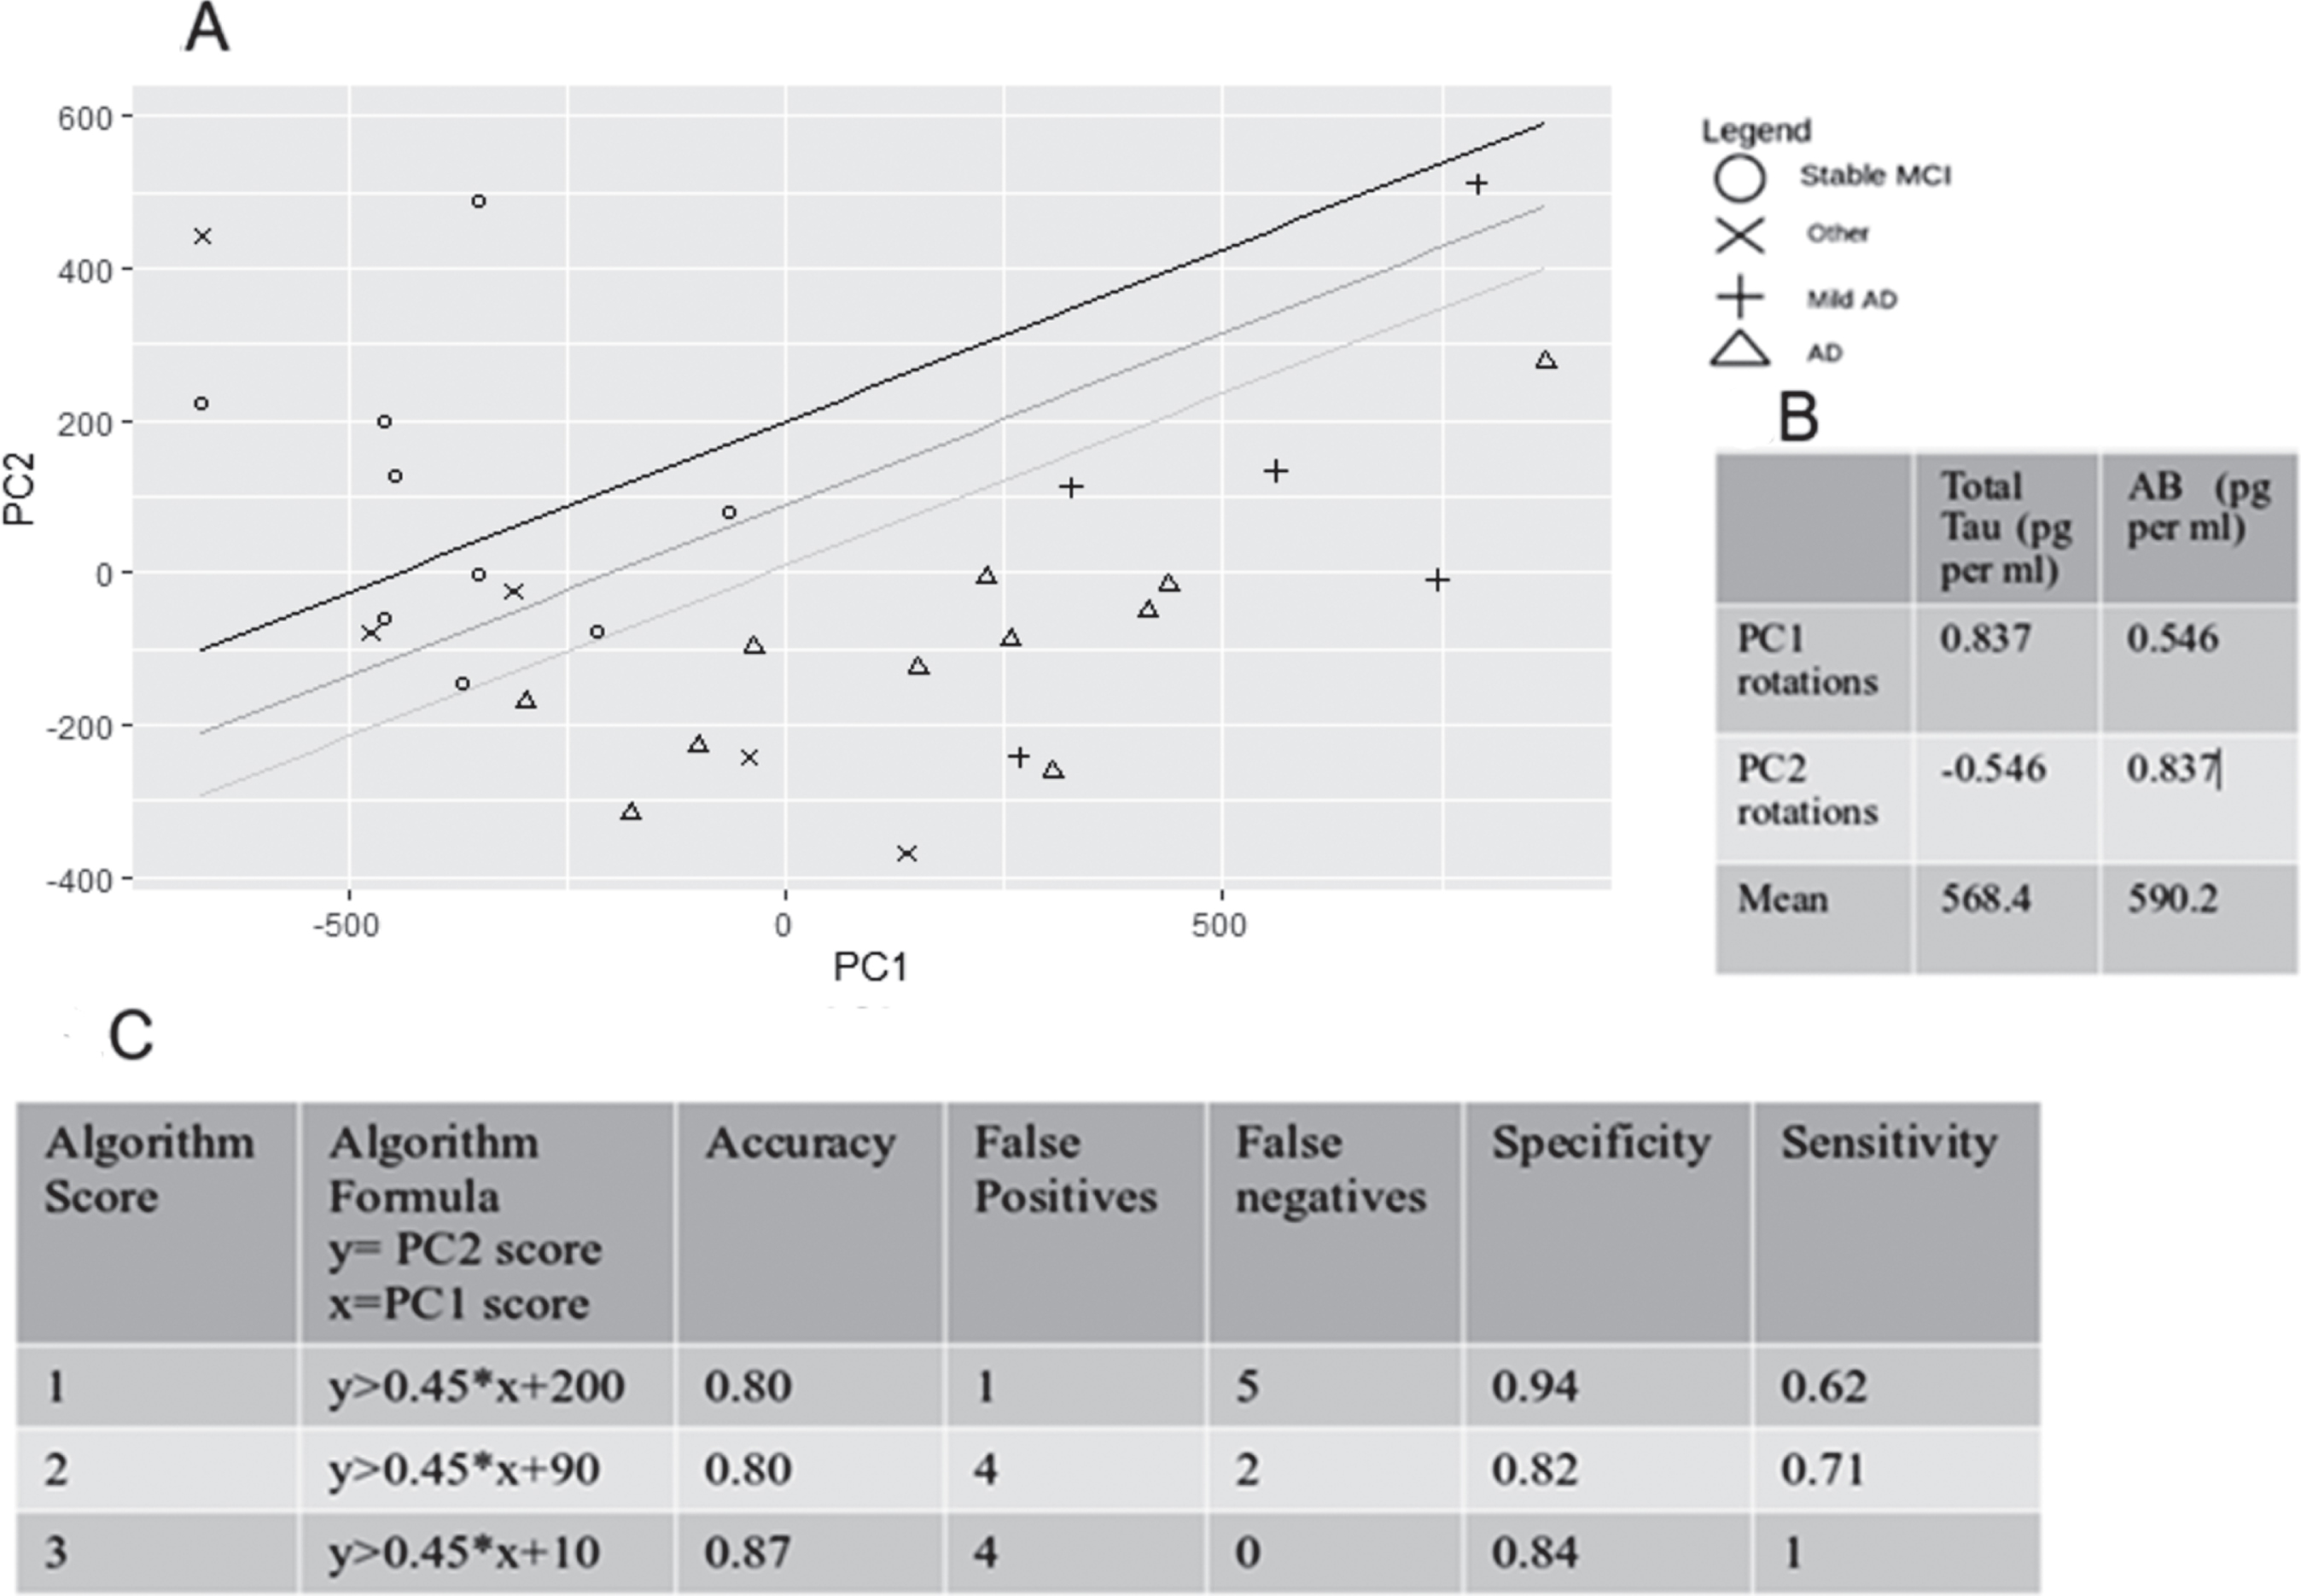 PCA plot using CSF total tau and Aβ. This plot includes the 3 lines that could be used as an example to segregate prodromal AD from the sMCI patients with different levels of sensitivity and specificity. In addition to the prodromal AD and sMCI, the “Other” group was added to the plot to inform about the efficacy of the separation when more practical data are used. Panel B shows the data that are required for PC1 and PC2 calculations to produce the algorithm. Panel C shows the specificity and sensitivity values for an algorithm using the PCA graph with different equations to distinguish between the groups. The best cut-off line is the line for score 3. The equations will be improved upon by using a larger data set.